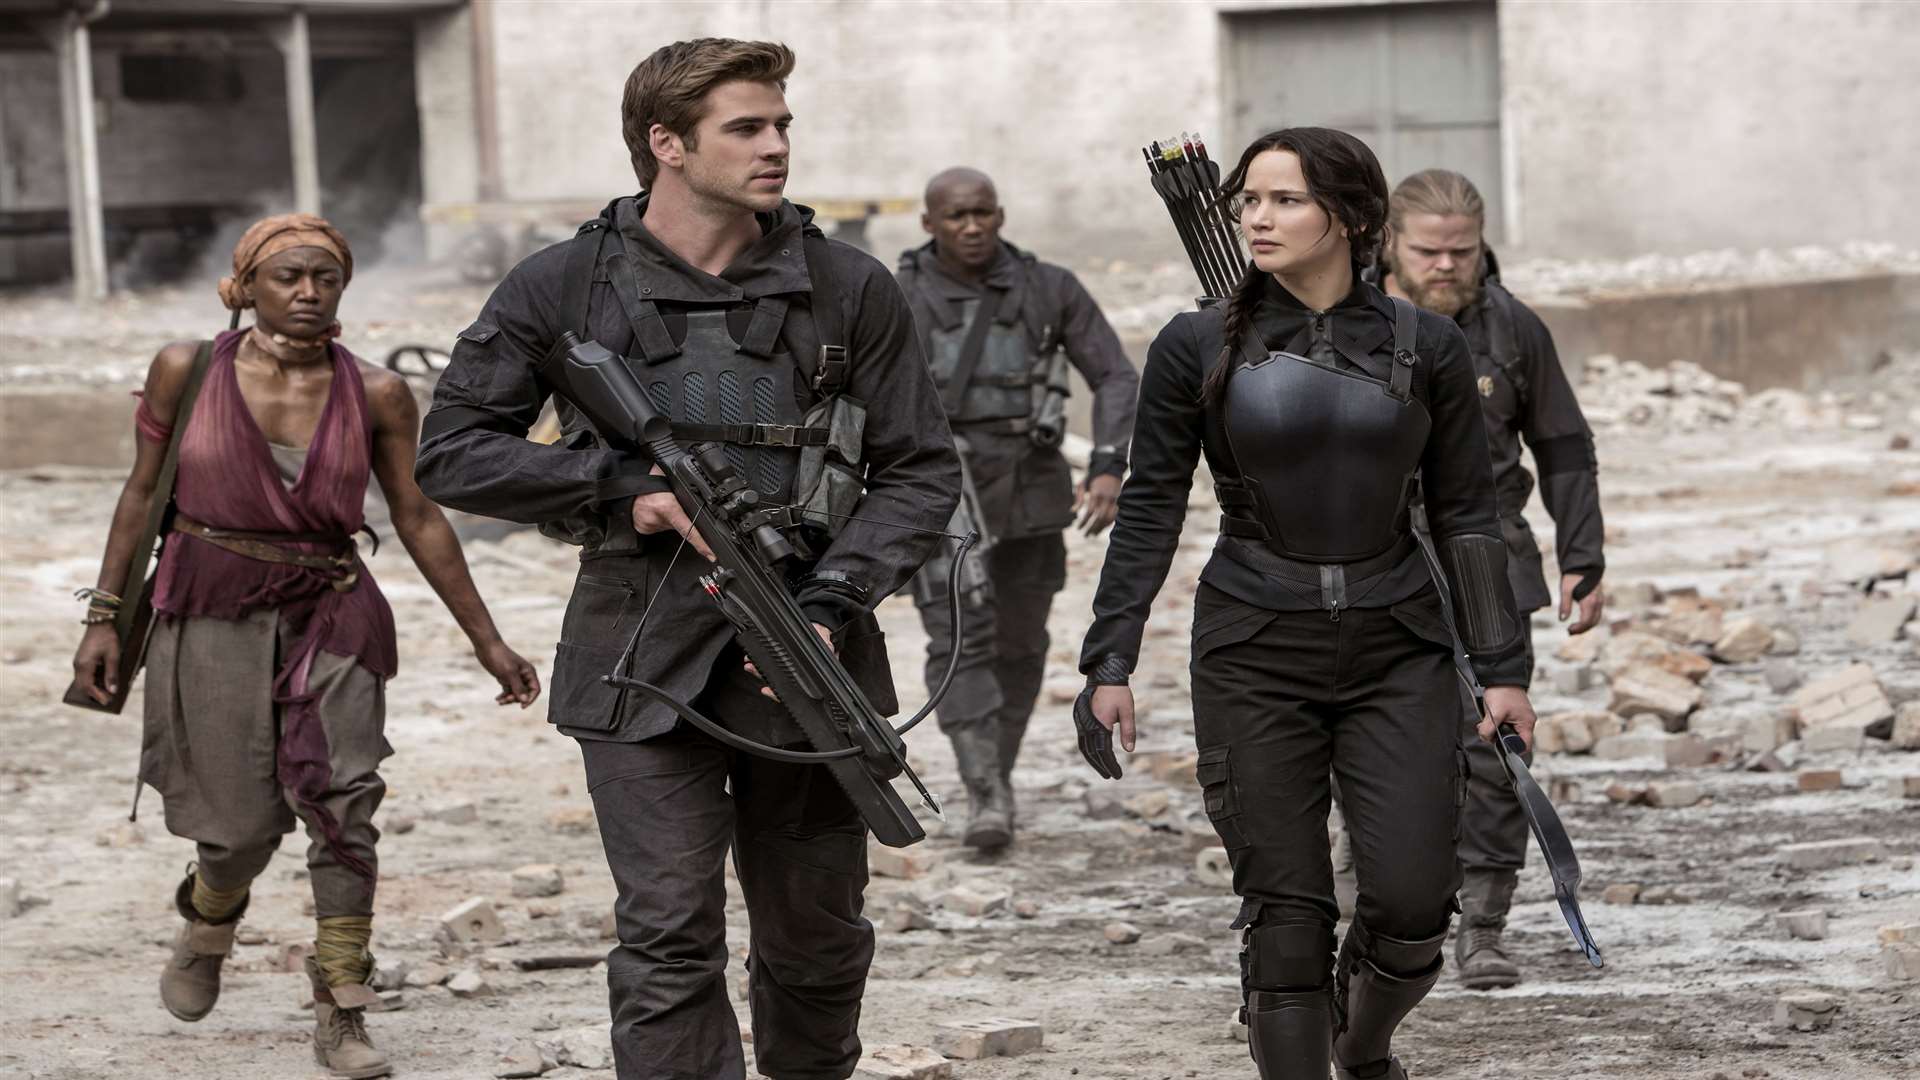 The Hunger Games: Mockingjay - Part 1, with Liam Hemsworth and Jennifer Lawrence. Picture: PA Photo/Handout/Universal